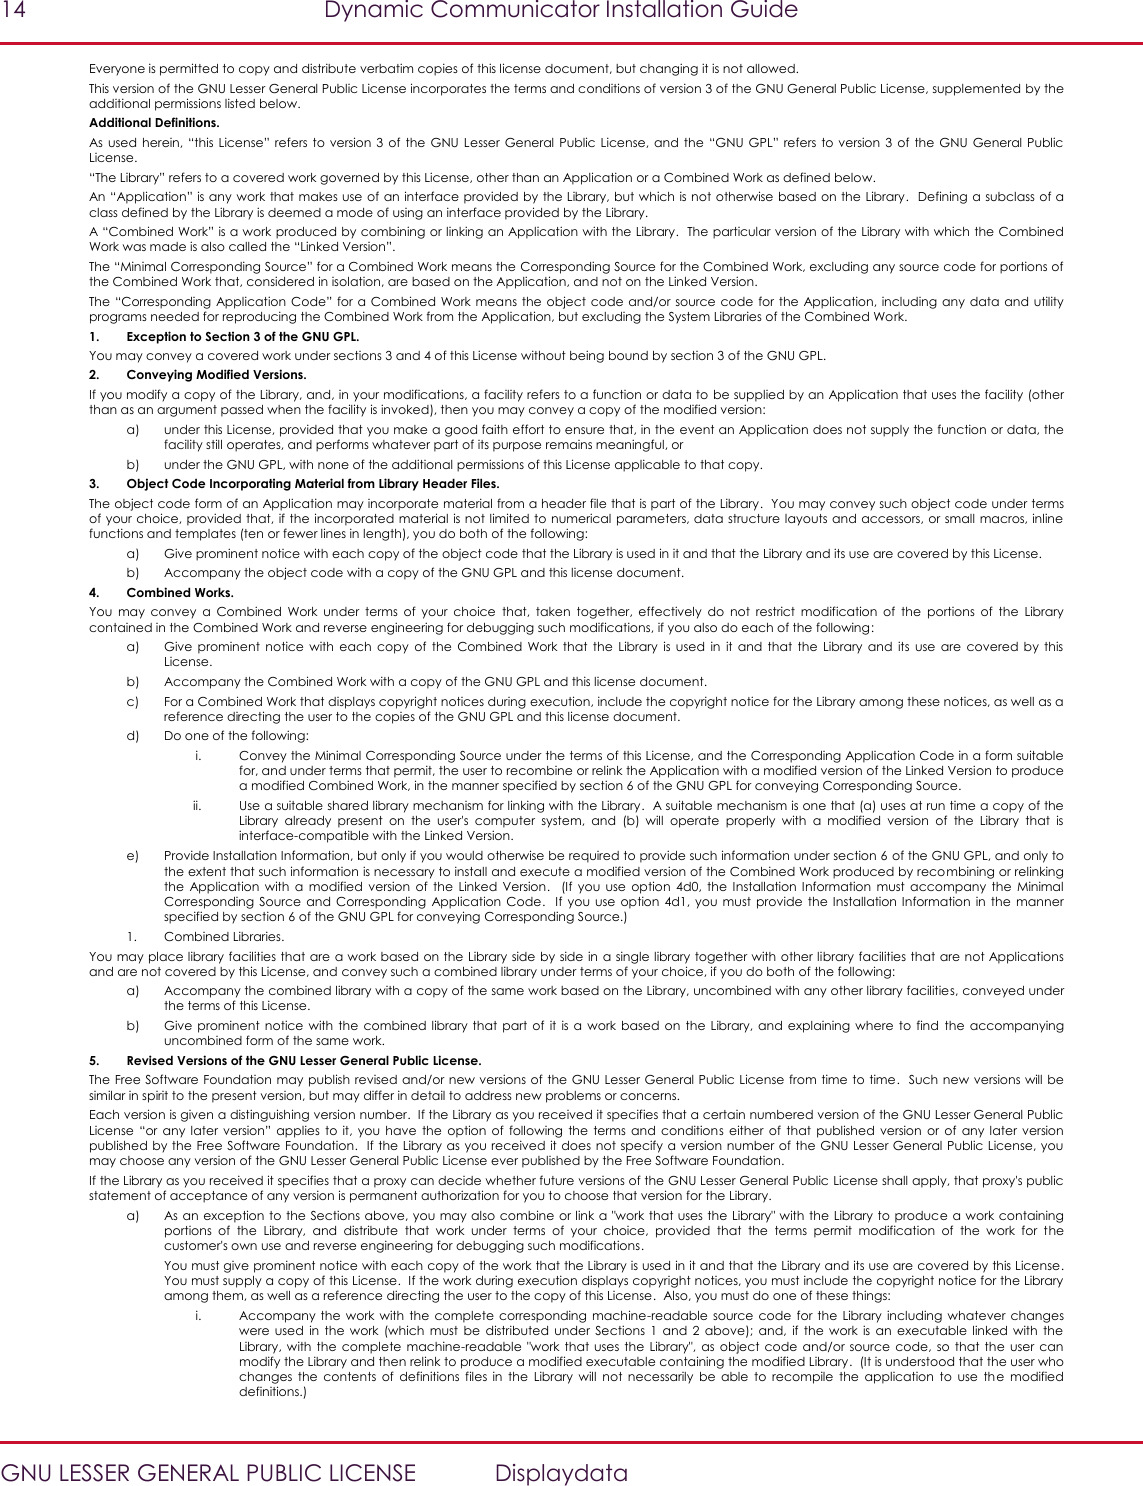 14  Dynamic Communicator Installation Guide   GNU LESSER GENERAL PUBLIC LICENSE  Displaydata Everyone is permitted to copy and distribute verbatim copies of this license document, but changing it is not allowed. This version of the GNU Lesser General Public License incorporates the terms and conditions of version 3 of the GNU General Public License, supplemented by the additional permissions listed below. Additional Definitions. As used  herein, “this  License” refers  to version 3  of the  GNU Lesser General  Public License, and  the “GNU  GPL”  refers  to version 3  of the GNU  General Public License. “The Library” refers to a covered work governed by this License, other than an Application or a Combined Work as defined below. An “Application” is any work that makes use of  an interface provided by the Library, but which is not otherwise based on the Library.  Defining a subclass of a class defined by the Library is deemed a mode of using an interface provided by the Library. A “Combined Work” is a work produced by combining or linking an Application with the Library.  The particular version of the Library with which the Combined Work was made is also called the “Linked Version”. The “Minimal Corresponding Source” for a Combined Work means the Corresponding Source for the Combined Work, excluding any source code for portions of the Combined Work that, considered in isolation, are based on the Application, and not on the Linked Version. The “Corresponding Application Code” for a Combined  Work  means  the object code and/or  source code  for  the  Application,  including  any data  and  utility programs needed for reproducing the Combined Work from the Application, but excluding the System Libraries of the Combined Work. 1. Exception to Section 3 of the GNU GPL. You may convey a covered work under sections 3 and 4 of this License without being bound by section 3 of the GNU GPL. 2. Conveying Modified Versions. If you modify a copy of the Library, and, in your modifications, a facility refers to a function or data to be supplied by an Application that uses the facility (other than as an argument passed when the facility is invoked), then you may convey a copy of the modified version: a) under this License, provided that you make a good faith effort to ensure that, in the event an Application does not supply the function or data, the facility still operates, and performs whatever part of its purpose remains meaningful, or b) under the GNU GPL, with none of the additional permissions of this License applicable to that copy. 3. Object Code Incorporating Material from Library Header Files. The object code form of an Application may incorporate material from a header file that is part of the Library.  You may convey such object code under terms of your choice, provided that, if the incorporated material is not limited to numerical parameters, data structure layouts and accessors, or small macros, inline functions and templates (ten or fewer lines in length), you do both of the following: a) Give prominent notice with each copy of the object code that the Library is used in it and that the Library and its use are covered by this License. b) Accompany the object code with a copy of the GNU GPL and this license document. 4. Combined Works. You  may  convey  a  Combined  Work  under  terms  of  your  choice  that,  taken  together,  effectively  do  not  restrict  modification  of  the  portions  of  the  Library contained in the Combined Work and reverse engineering for debugging such modifications, if you also do each of the following: a) Give prominent  notice  with each  copy  of  the  Combined  Work  that  the  Library  is  used  in  it and  that  the  Library  and  its  use  are  covered  by  this License. b) Accompany the Combined Work with a copy of the GNU GPL and this license document. c) For a Combined Work that displays copyright notices during execution, include the copyright notice for the Library among these notices, as well as a reference directing the user to the copies of the GNU GPL and this license document. d) Do one of the following:  i. Convey the Minimal Corresponding Source under the terms of this License, and the Corresponding Application Code in a form suitable for, and under terms that permit, the user to recombine or relink the Application with a modified version of the Linked Version to produce a modified Combined Work, in the manner specified by section 6 of the GNU GPL for conveying Corresponding Source. ii. Use a suitable shared library mechanism for linking with the Library.  A suitable mechanism is one that (a) uses at run time a copy of the Library  already  present  on  the  user&apos;s  computer  system,  and  (b)  will  operate  properly  with  a  modified  version  of  the  Library  that  is interface-compatible with the Linked Version. e) Provide Installation Information, but only if you would otherwise be required to provide such information under section 6 of the GNU GPL, and only to the extent that such information is necessary to install and execute a modified version of the Combined Work produced by recombining or relinking the  Application  with  a  modified  version  of the  Linked  Version.    (If  you  use  option  4d0,  the  Installation  Information  must accompany  the  Minimal Corresponding  Source and  Corresponding  Application  Code.   If  you use option  4d1,  you must  provide the  Installation Information in  the  manner specified by section 6 of the GNU GPL for conveying Corresponding Source.) 1. Combined Libraries. You may place library facilities that are a work based on the Library side by side in a single library together with other library facilities that are not Applications and are not covered by this License, and convey such a combined library under terms of your choice, if you do both of the following: a) Accompany the combined library with a copy of the same work based on the Library, uncombined with any other library facilities, conveyed under the terms of this License. b) Give prominent  notice  with the  combined  library that  part of  it is a  work based  on the  Library,  and  explaining where  to find  the accompanying uncombined form of the same work. 5. Revised Versions of the GNU Lesser General Public License. The Free Software Foundation may publish revised and/or new versions of the GNU Lesser General Public License from time to time.  Such new versions will be similar in spirit to the present version, but may differ in detail to address new problems or concerns. Each version is given a distinguishing version number.  If the Library as you received it specifies that a certain numbered version of the GNU Lesser General Public License  “or  any  later  version”  applies  to  it, you  have  the  option of  following  the  terms and  conditions  either  of  that  published  version or  of  any later  version published by the Free Software Foundation.  If the Library as you received it does not specify a version number of the GNU Lesser General Public License, you may choose any version of the GNU Lesser General Public License ever published by the Free Software Foundation. If the Library as you received it specifies that a proxy can decide whether future versions of the GNU Lesser General Public License shall apply, that proxy&apos;s public statement of acceptance of any version is permanent authorization for you to choose that version for the Library. a) As an exception to the Sections above, you may also combine or link a &quot;work that uses the Library&quot; with the Library to produce a work containing portions  of  the  Library,  and  distribute  that  work  under  terms  of  your  choice,  provided  that  the  terms  permit  modification  of  the  work  for  the customer&apos;s own use and reverse engineering for debugging such modifications.   You must give prominent notice with each copy of the work that the Library is used in it and that the Library and its use are covered by this License.  You must supply a copy of this License.  If the work during execution displays copyright notices, you must include the copyright notice for the Library among them, as well as a reference directing the user to the copy of this License.  Also, you must do one of these things:  i. Accompany the  work with  the  complete  corresponding machine-readable  source code  for  the  Library  including whatever changes were  used  in  the  work  (which  must  be  distributed  under  Sections  1  and  2  above); and,  if  the  work  is  an  executable  linked  with  the Library, with  the complete machine-readable  &quot;work that  uses  the Library&quot;,  as object  code  and/or source  code, so  that the  user  can modify the Library and then relink to produce a modified executable containing the modified Library.  (It is understood that the user who changes  the  contents  of  definitions  files  in  the  Library  will  not  necessarily  be  able  to  recompile  the  application  to  use  th e  modified definitions.)  